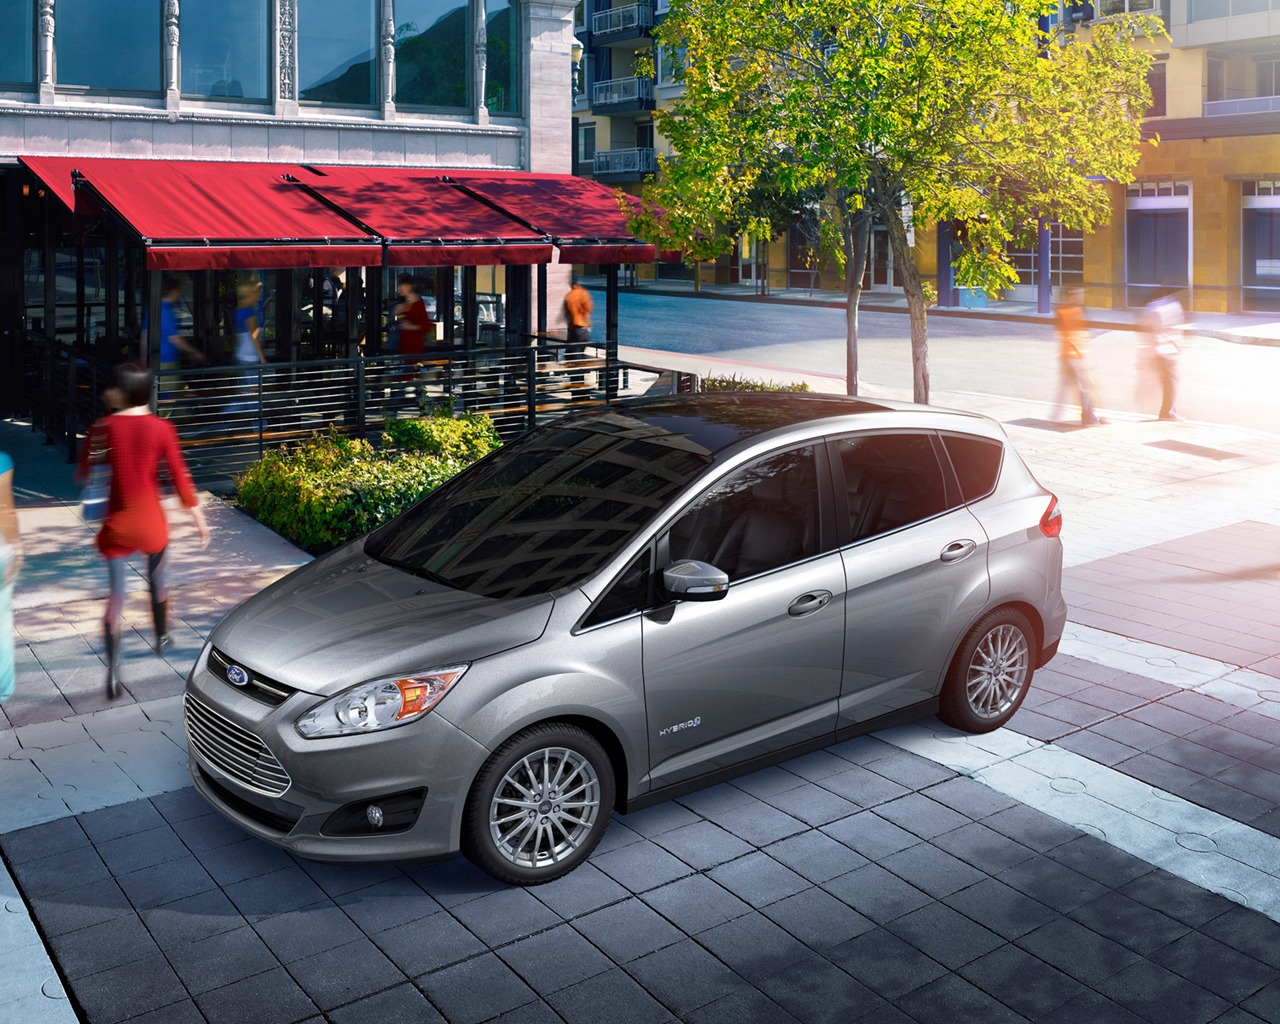 2013 Ford C Max Hybrid for 1280 x 1024 resolution